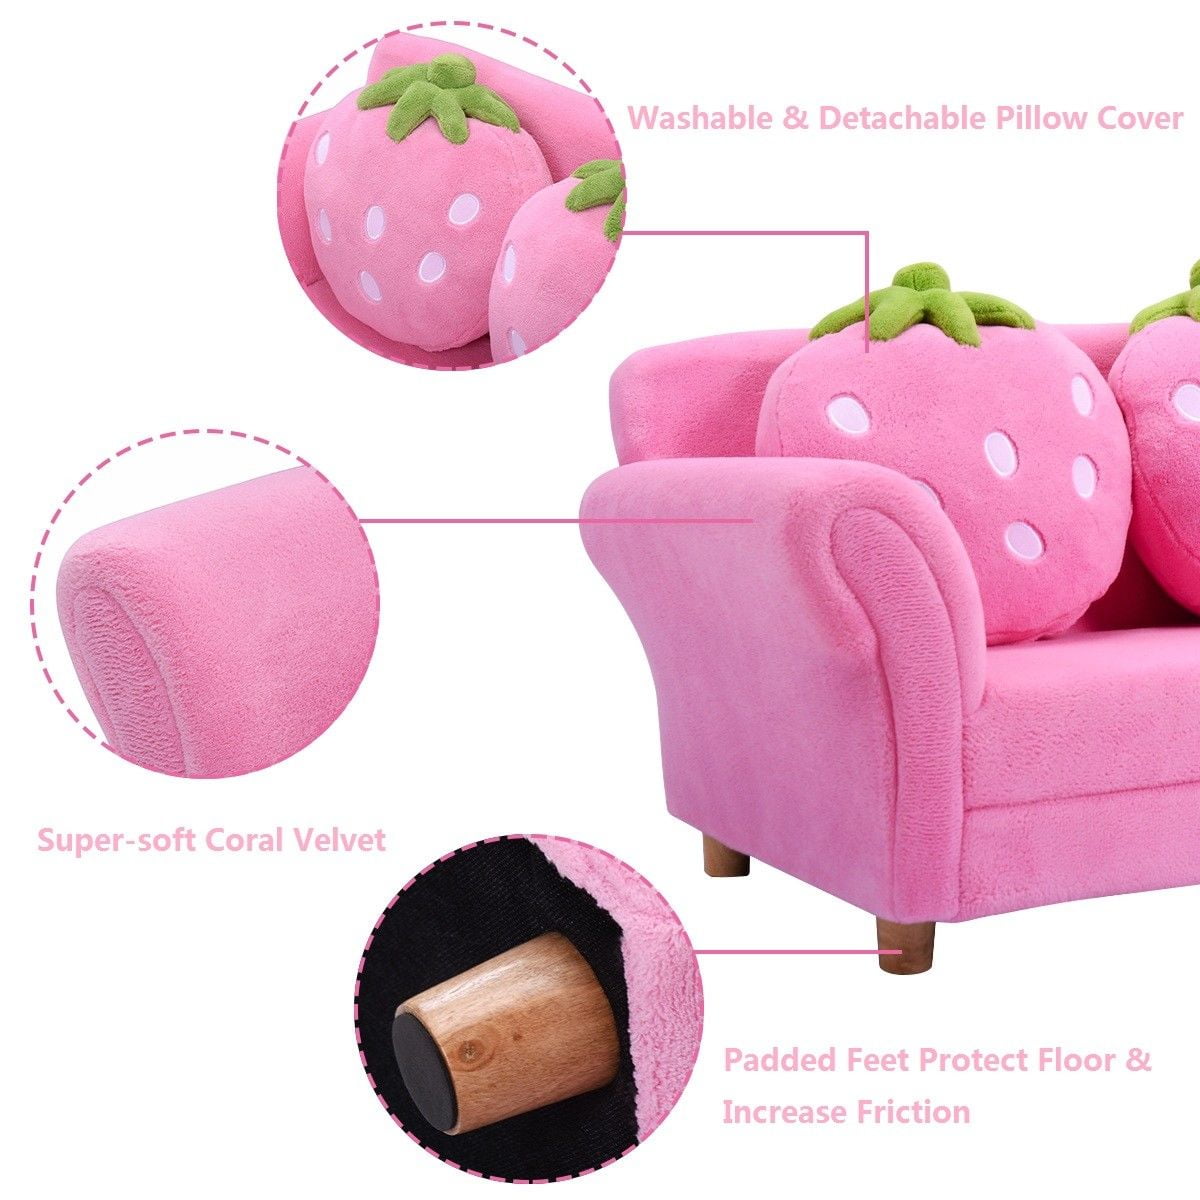 toddler plush couch